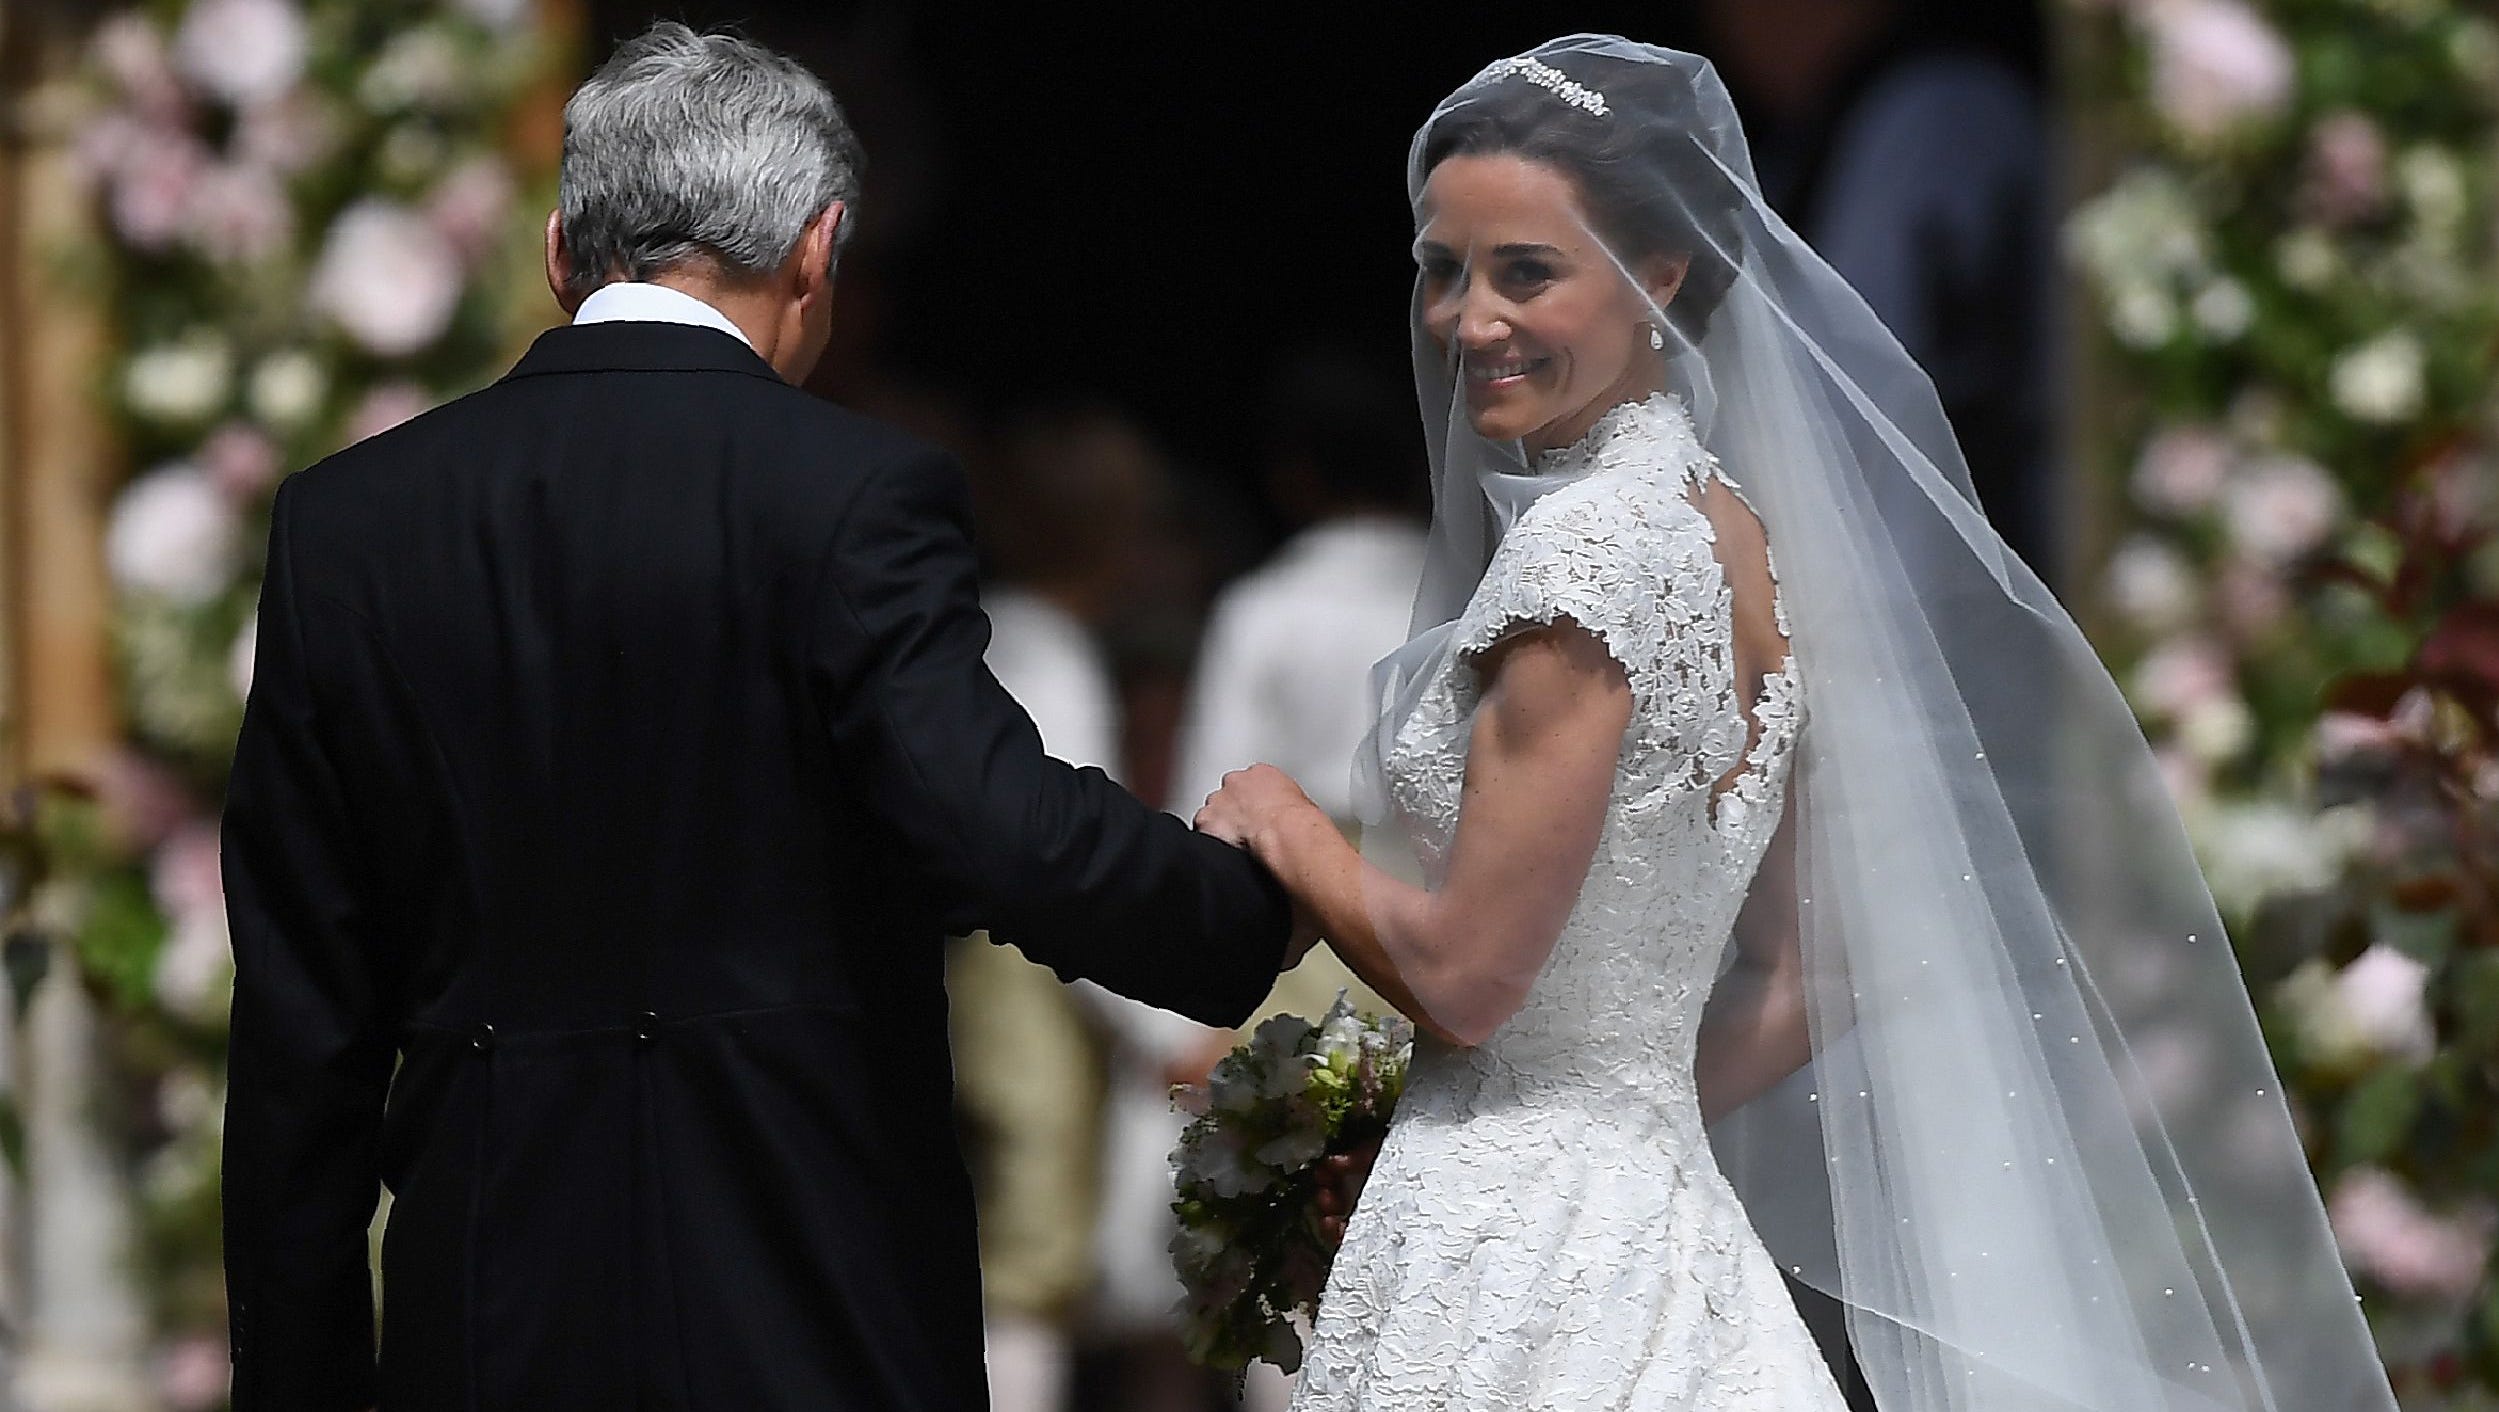 Pippa Middleton's wedding: Get details on her stunning dress by Giles Deacon